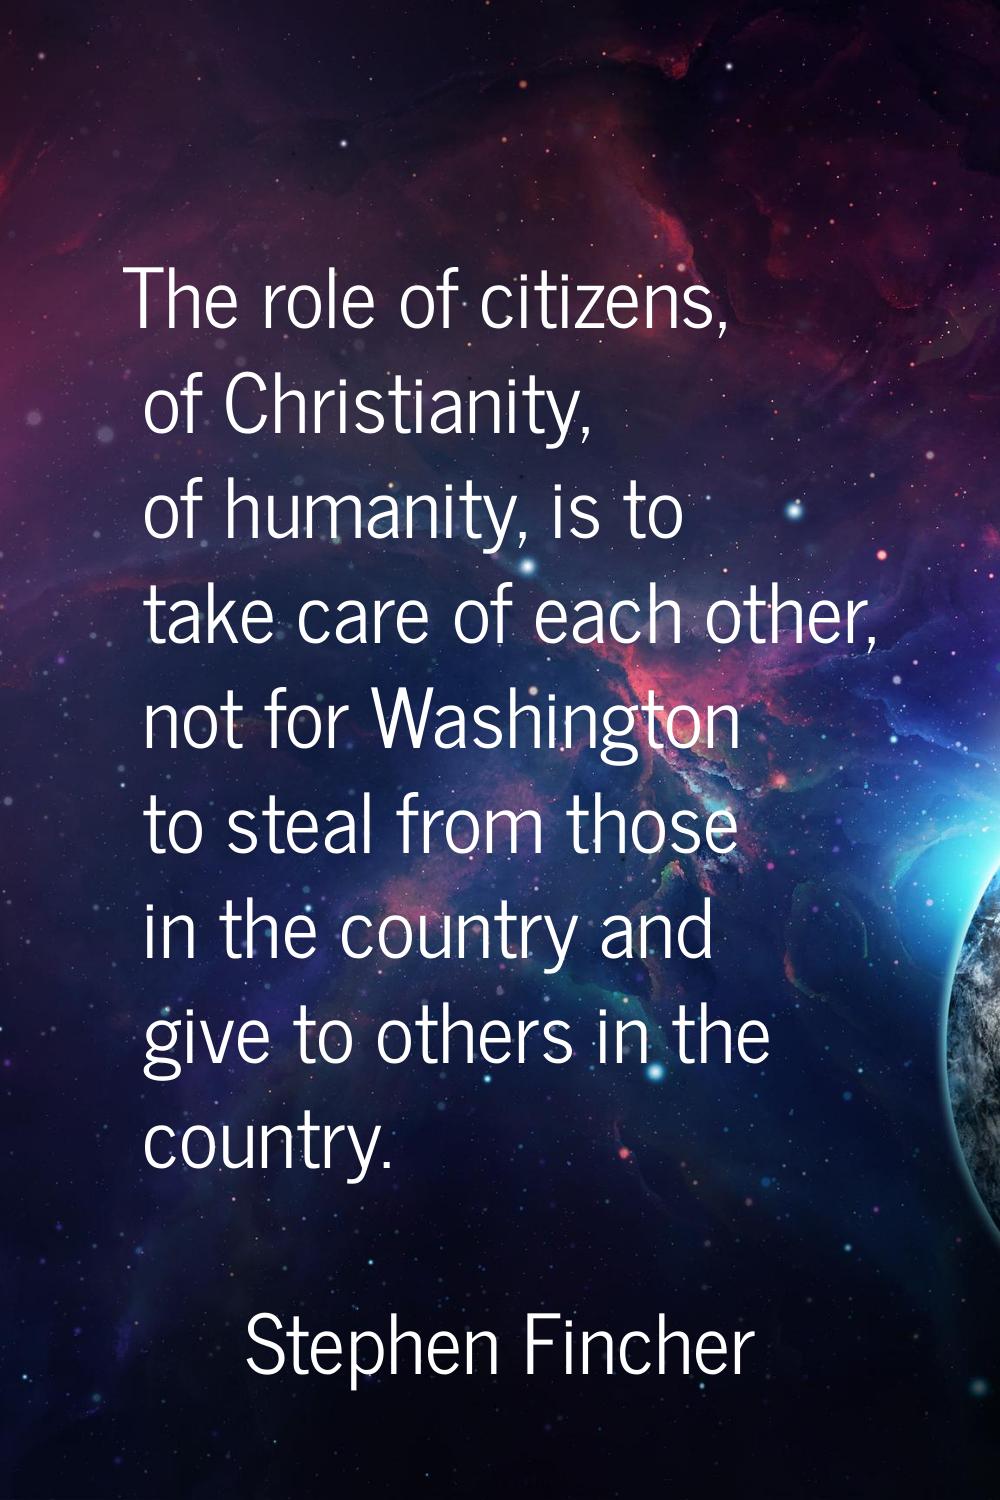 The role of citizens, of Christianity, of humanity, is to take care of each other, not for Washingt